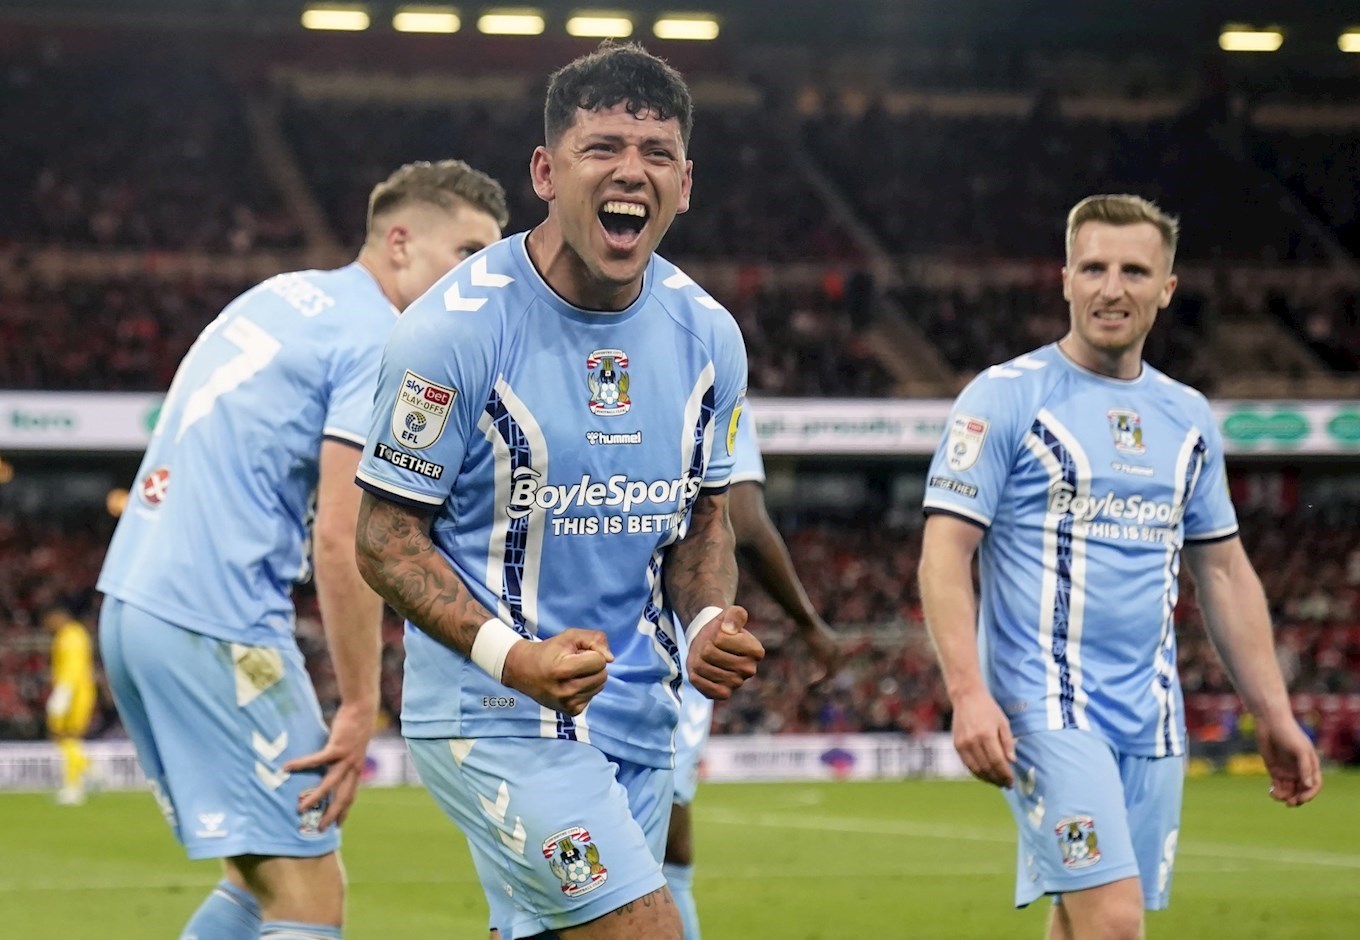 REPORT: Middlesbrough 0-1 Sky Blues - News - Coventry City